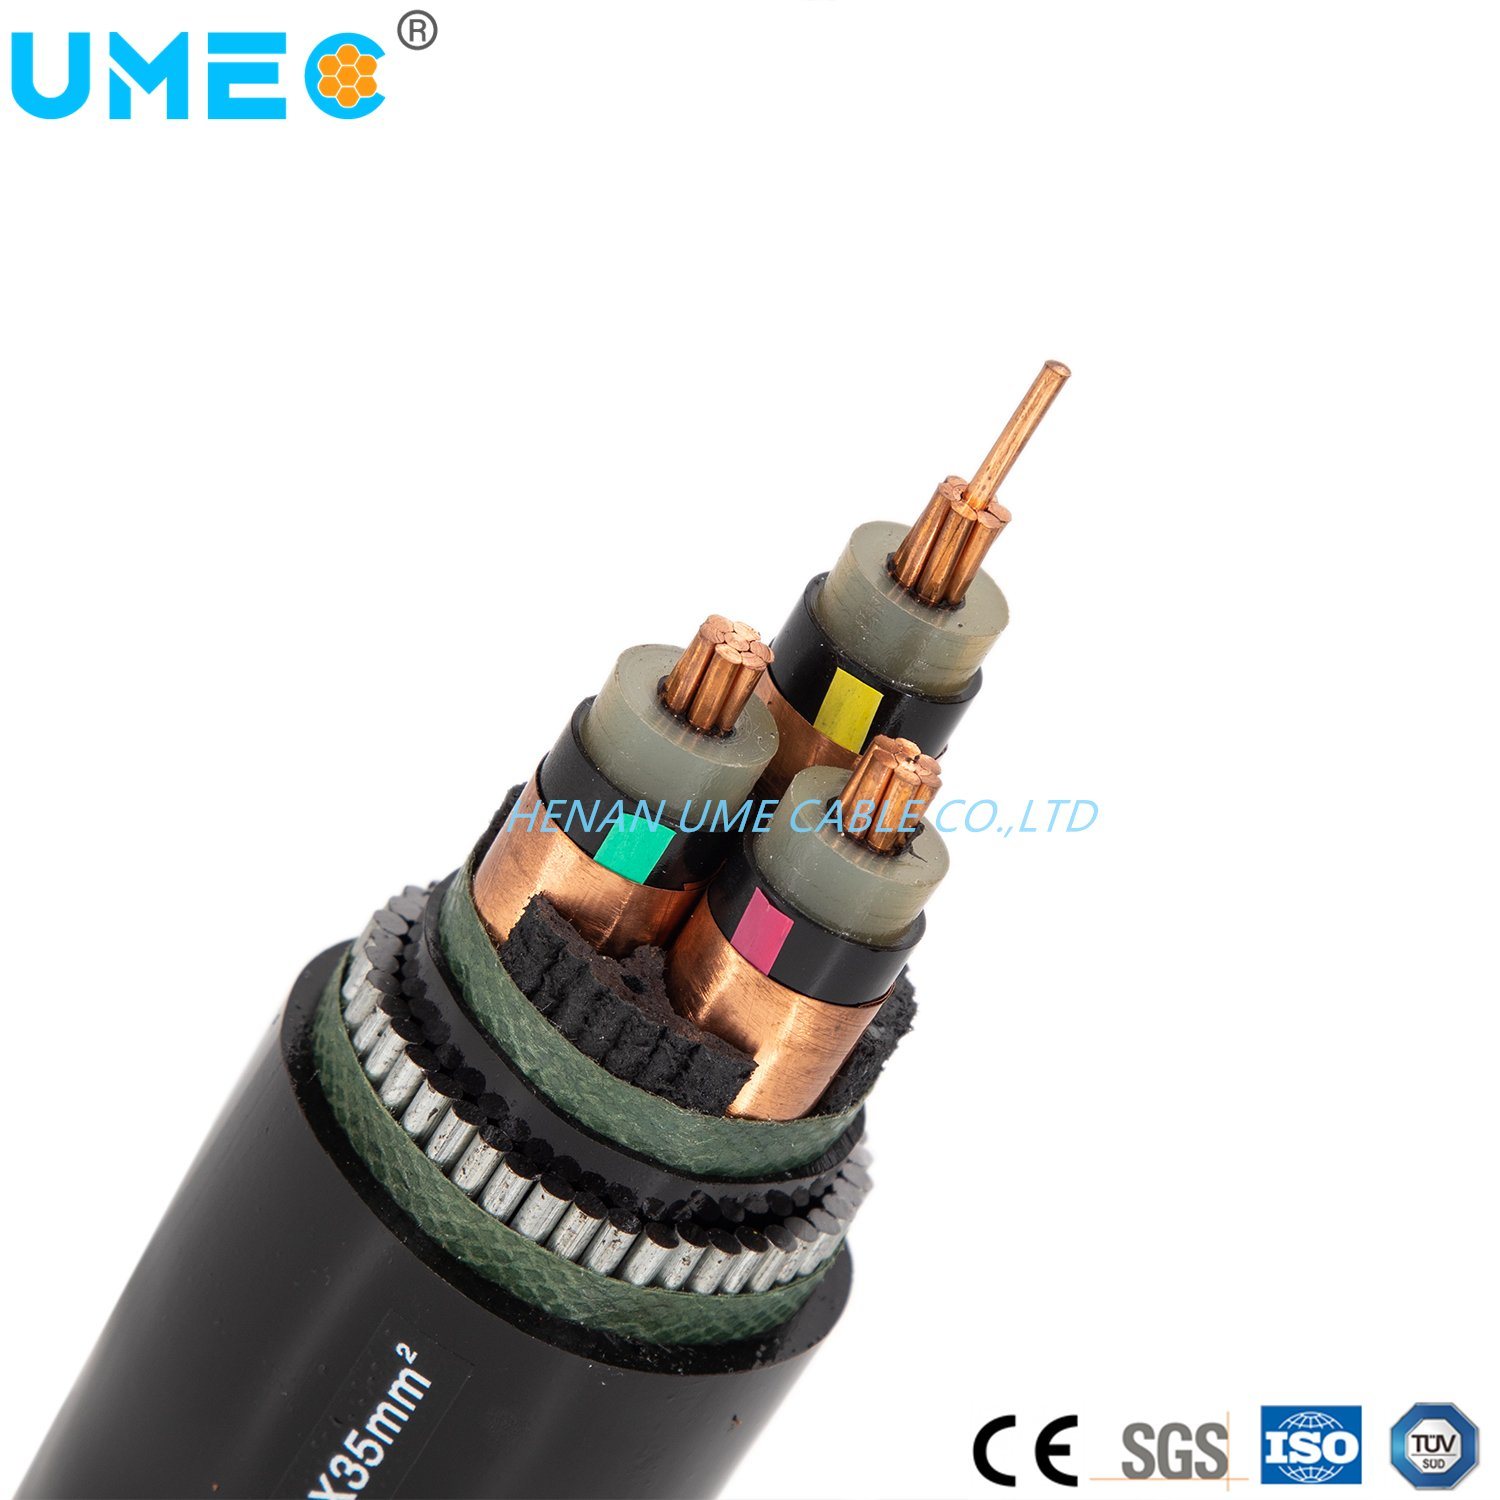 Fire Resistant Power Cable with Cu Core PVC Insulation Sheath